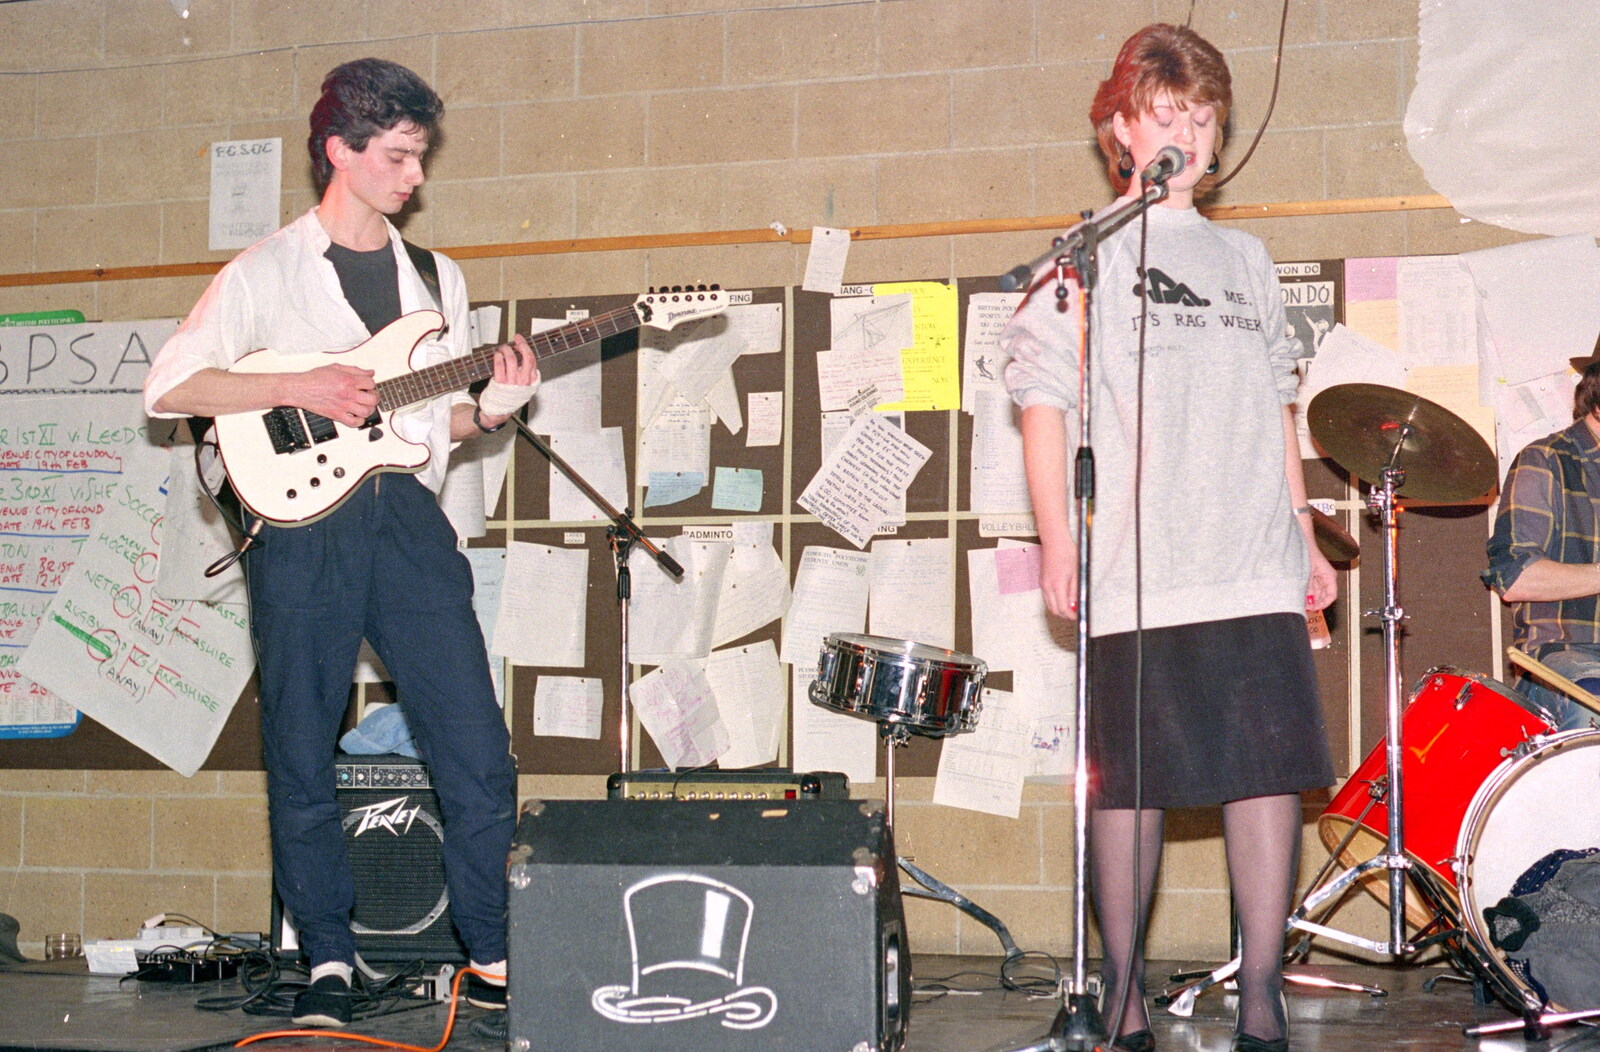 Guitar action from Uni: The PPSU "Jazz" RAG Review and Charity Auction, Plymouth, Devon - 19th February 1986